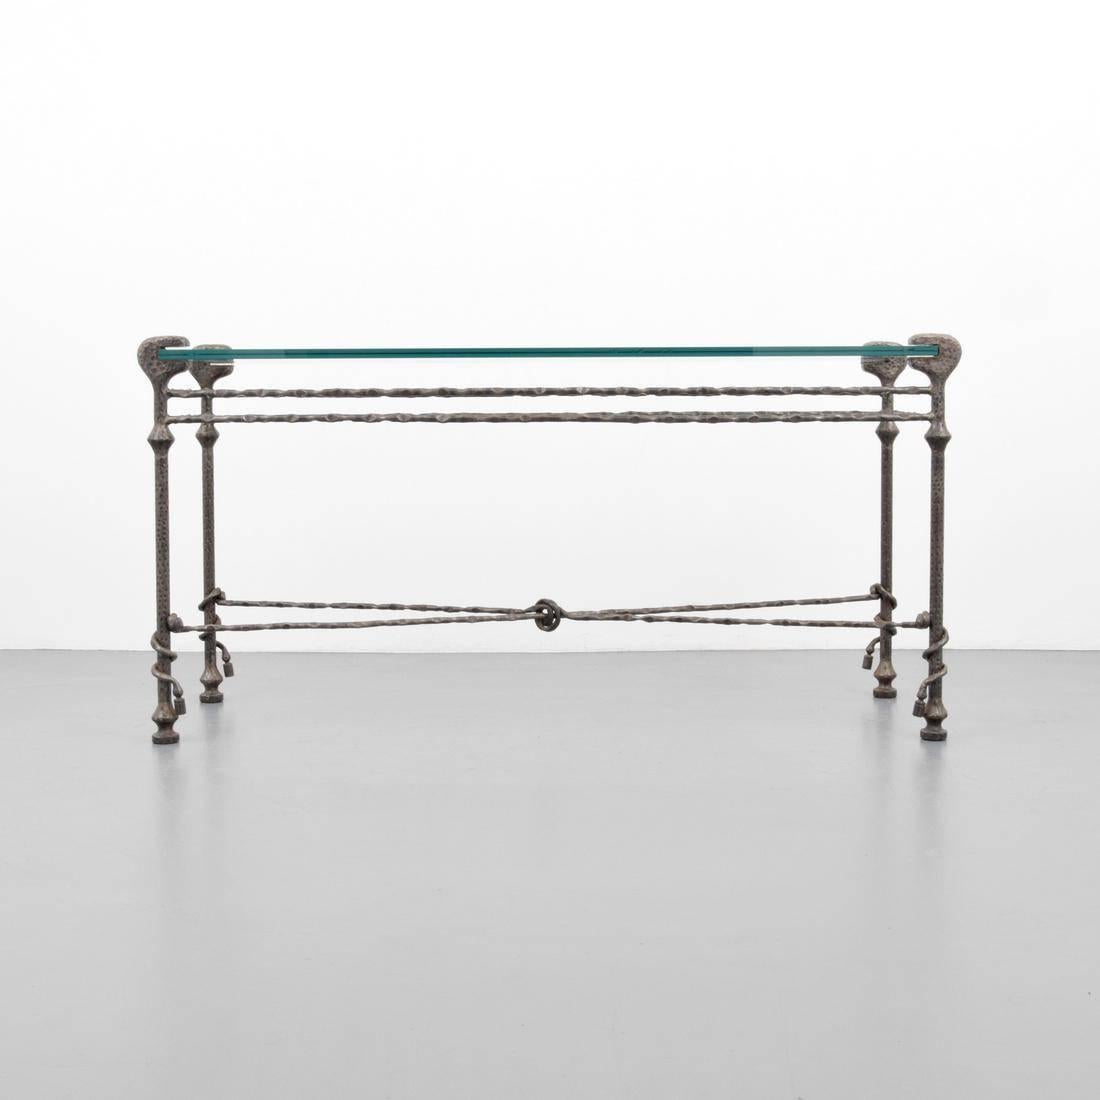 This substantial hammered iron and glass console table is created in the manner of Diego Giacometti. This piece hails from the mid-20th century (circa 1960s), but works equally as well in today's interiors. We find there to be both a rustic quality